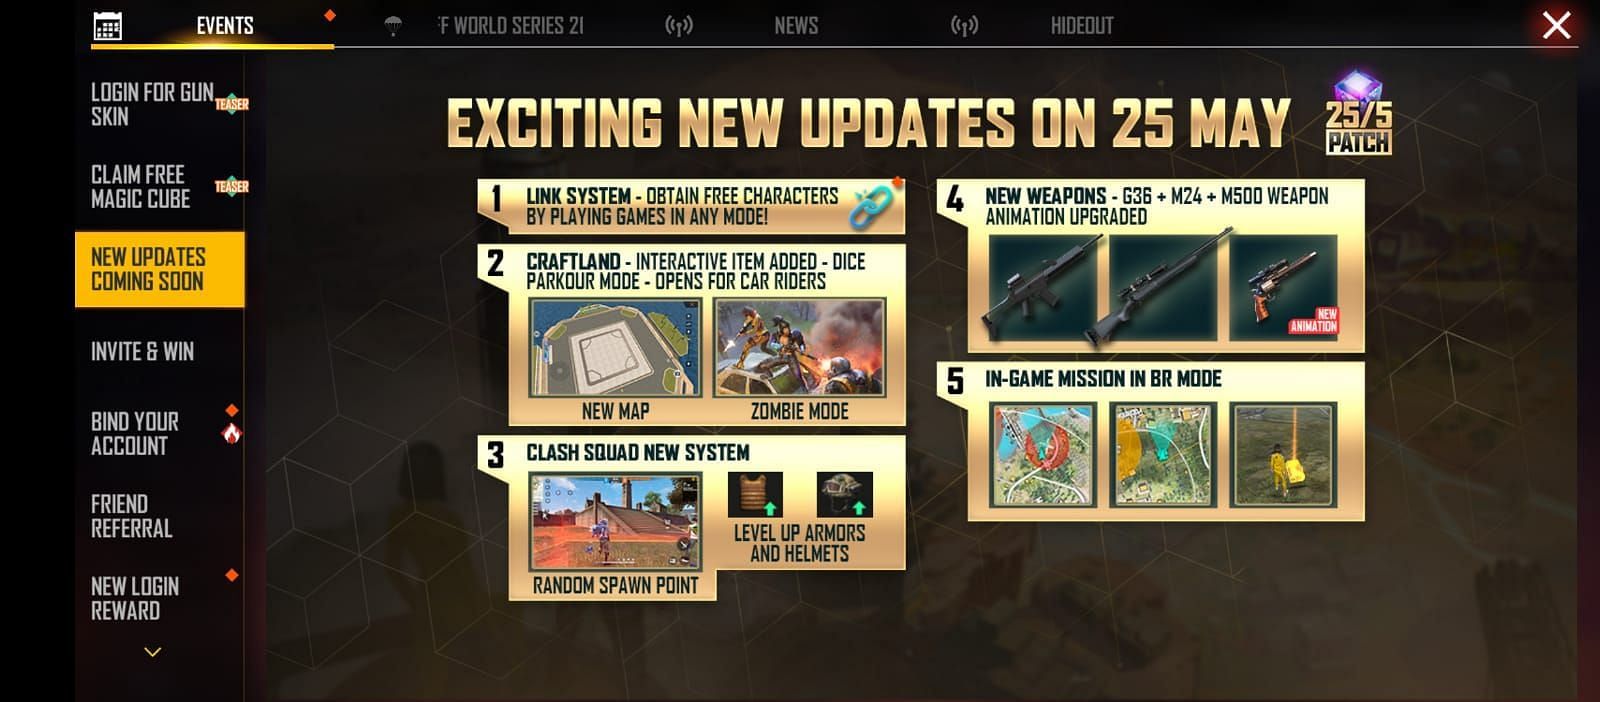 Here are some of the features that mobile gamers can look forward to in the new update (Image via Garena)